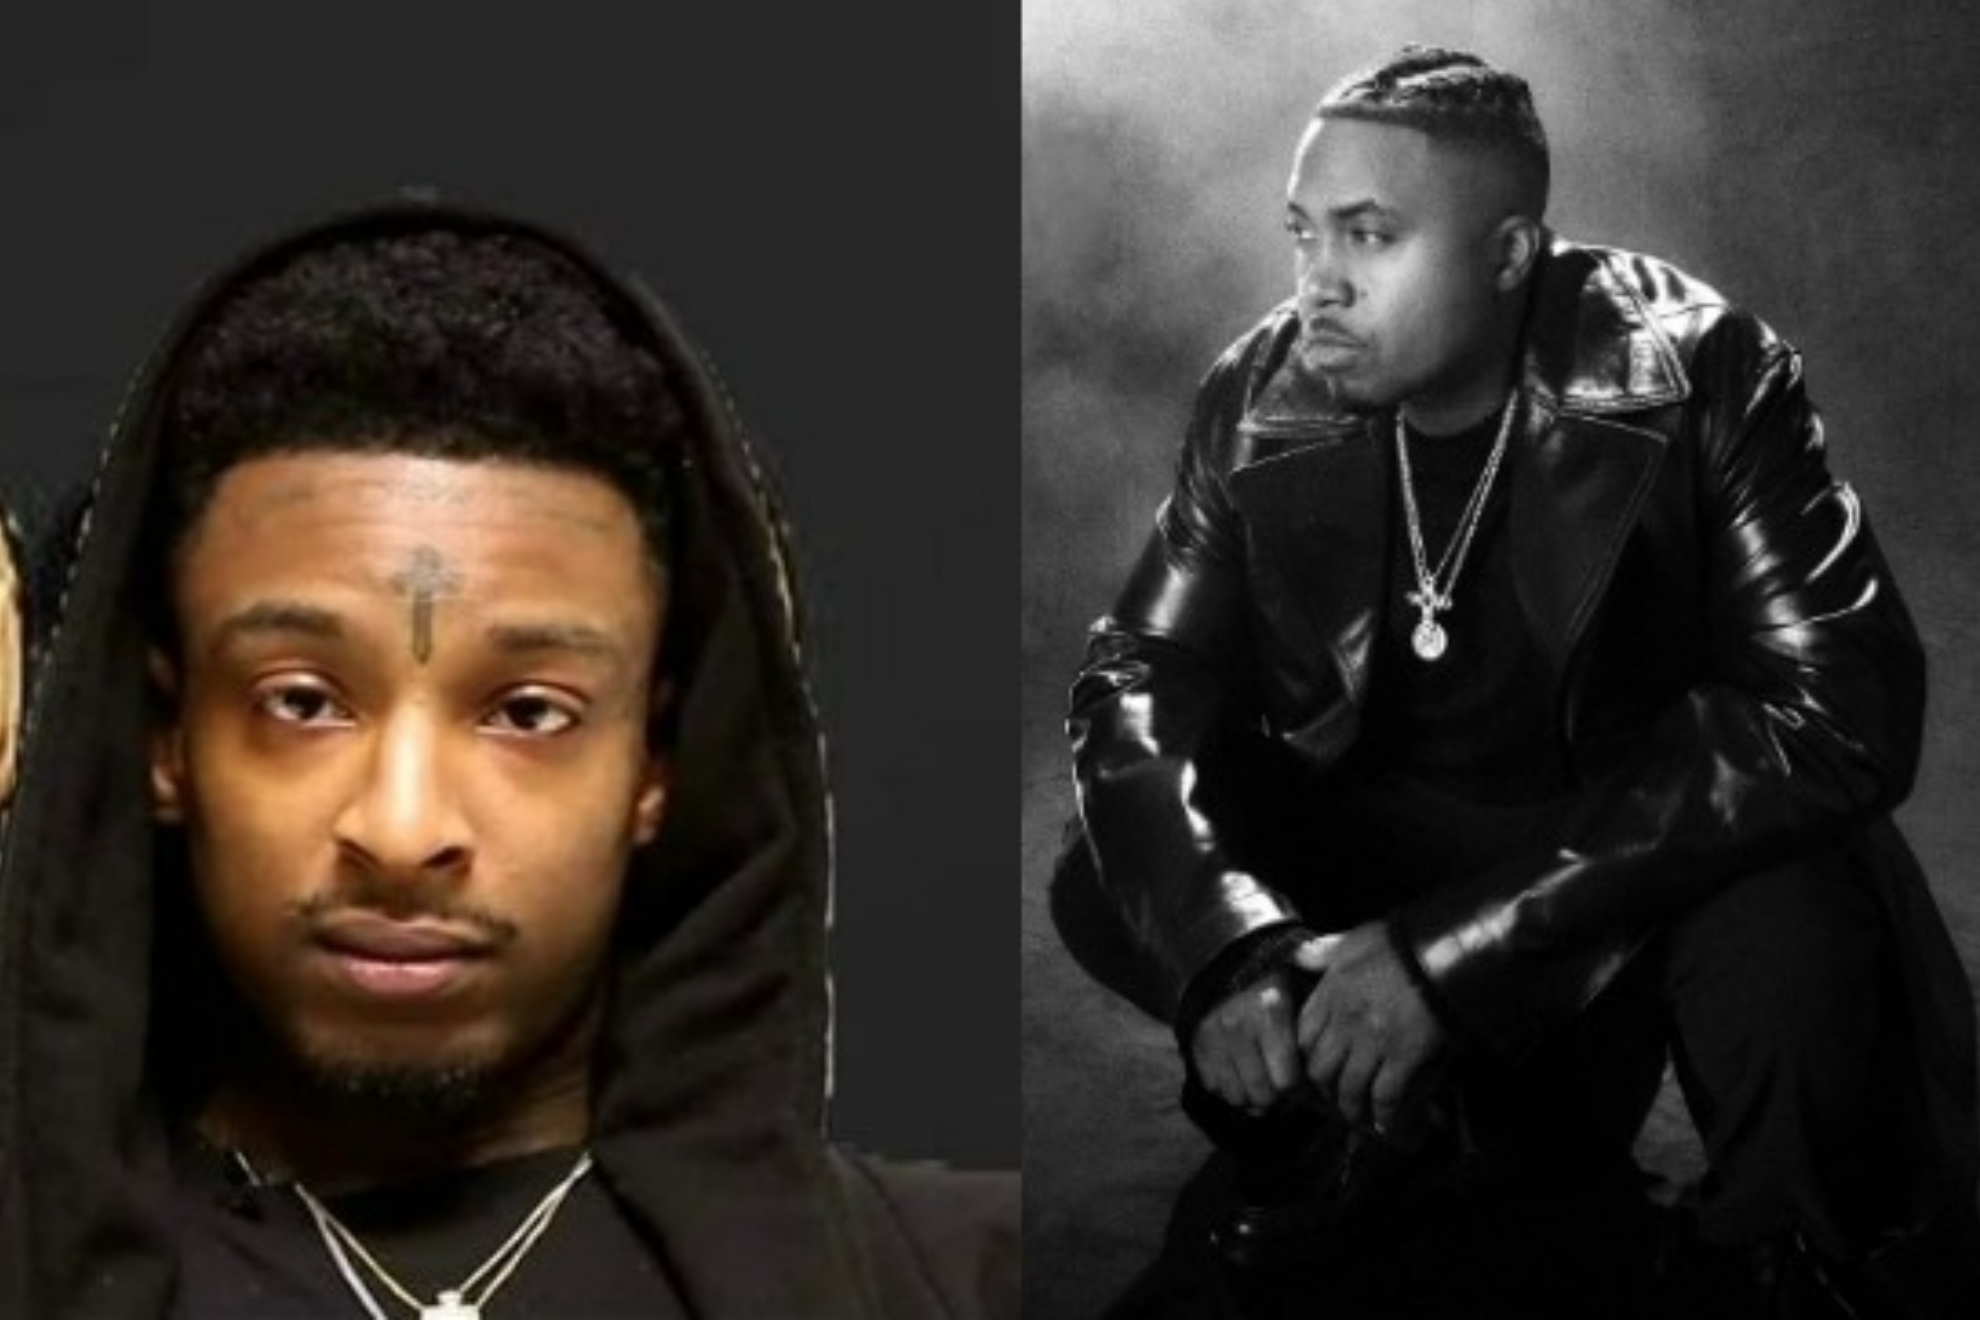 21 Savage backpedals his offenses toward Nas after massive heat received 'I was dumb'